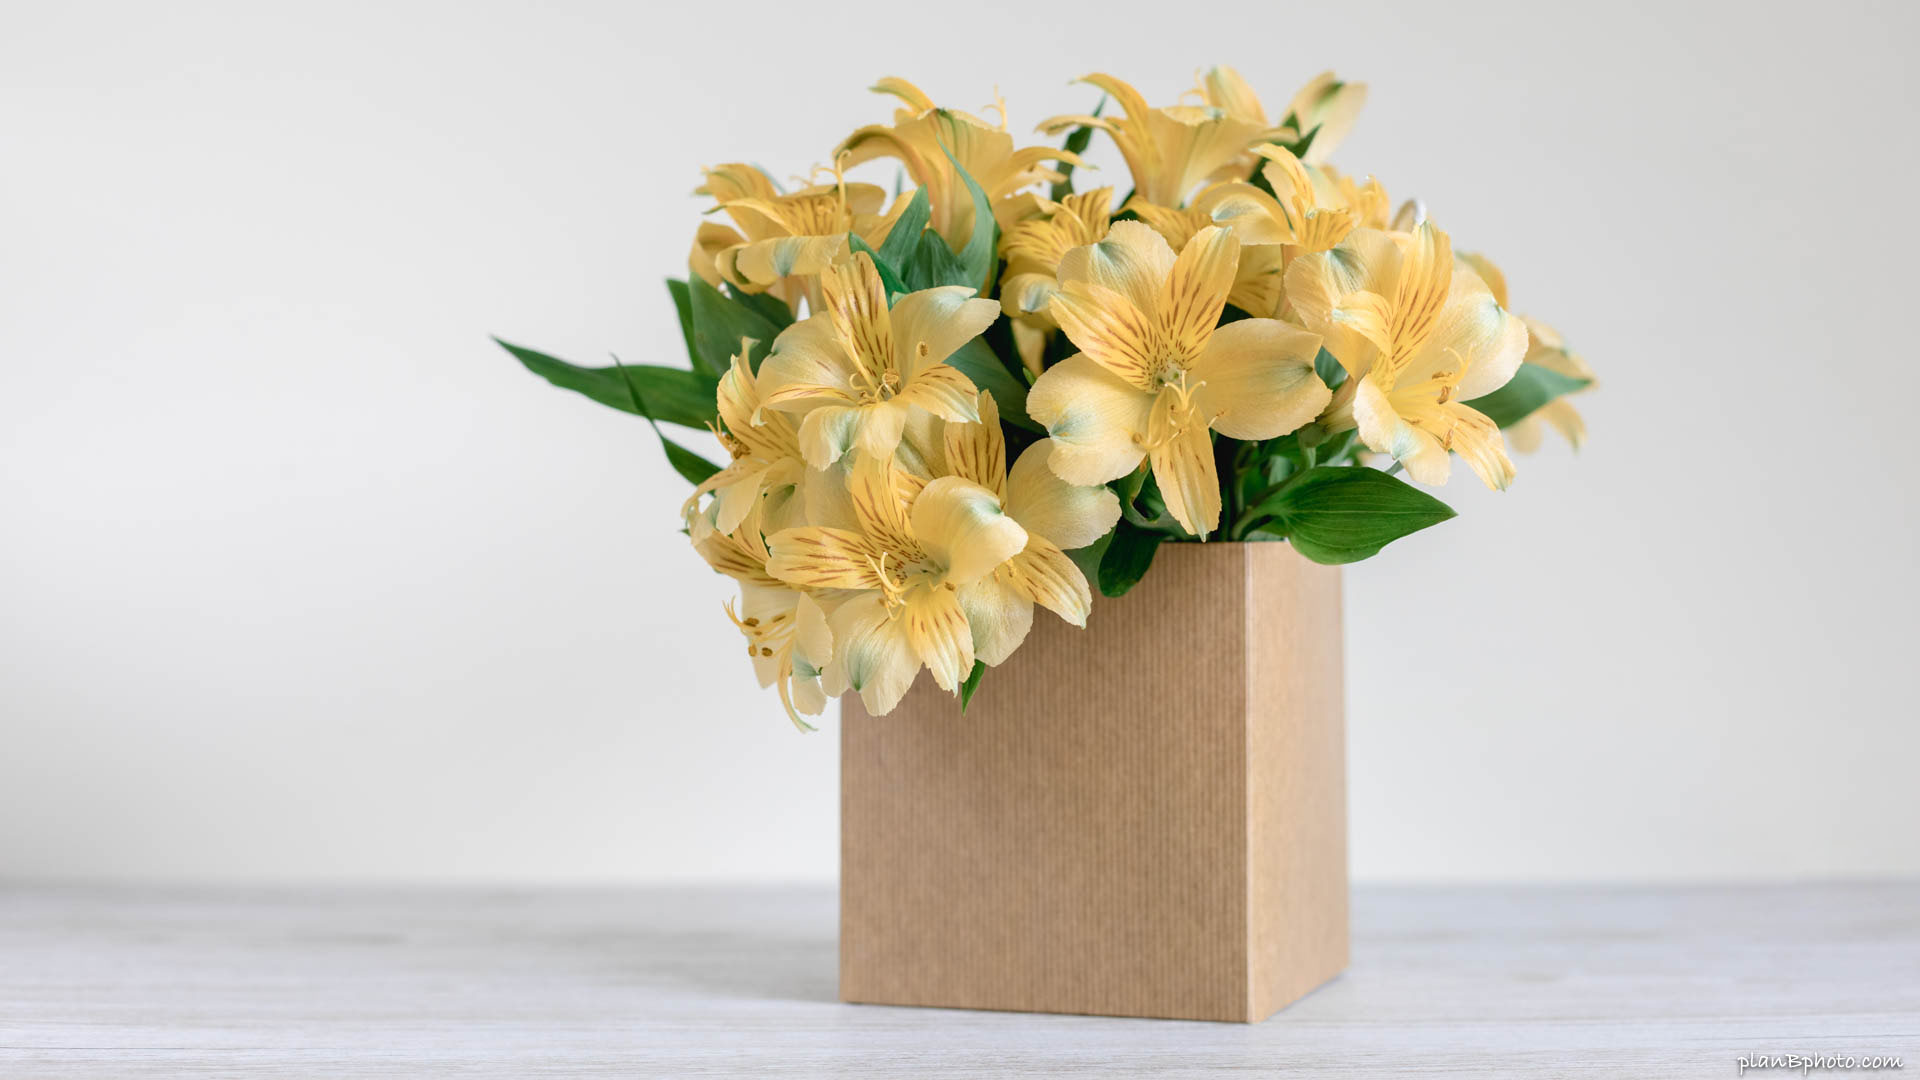 Yellow flowers in a box on white background